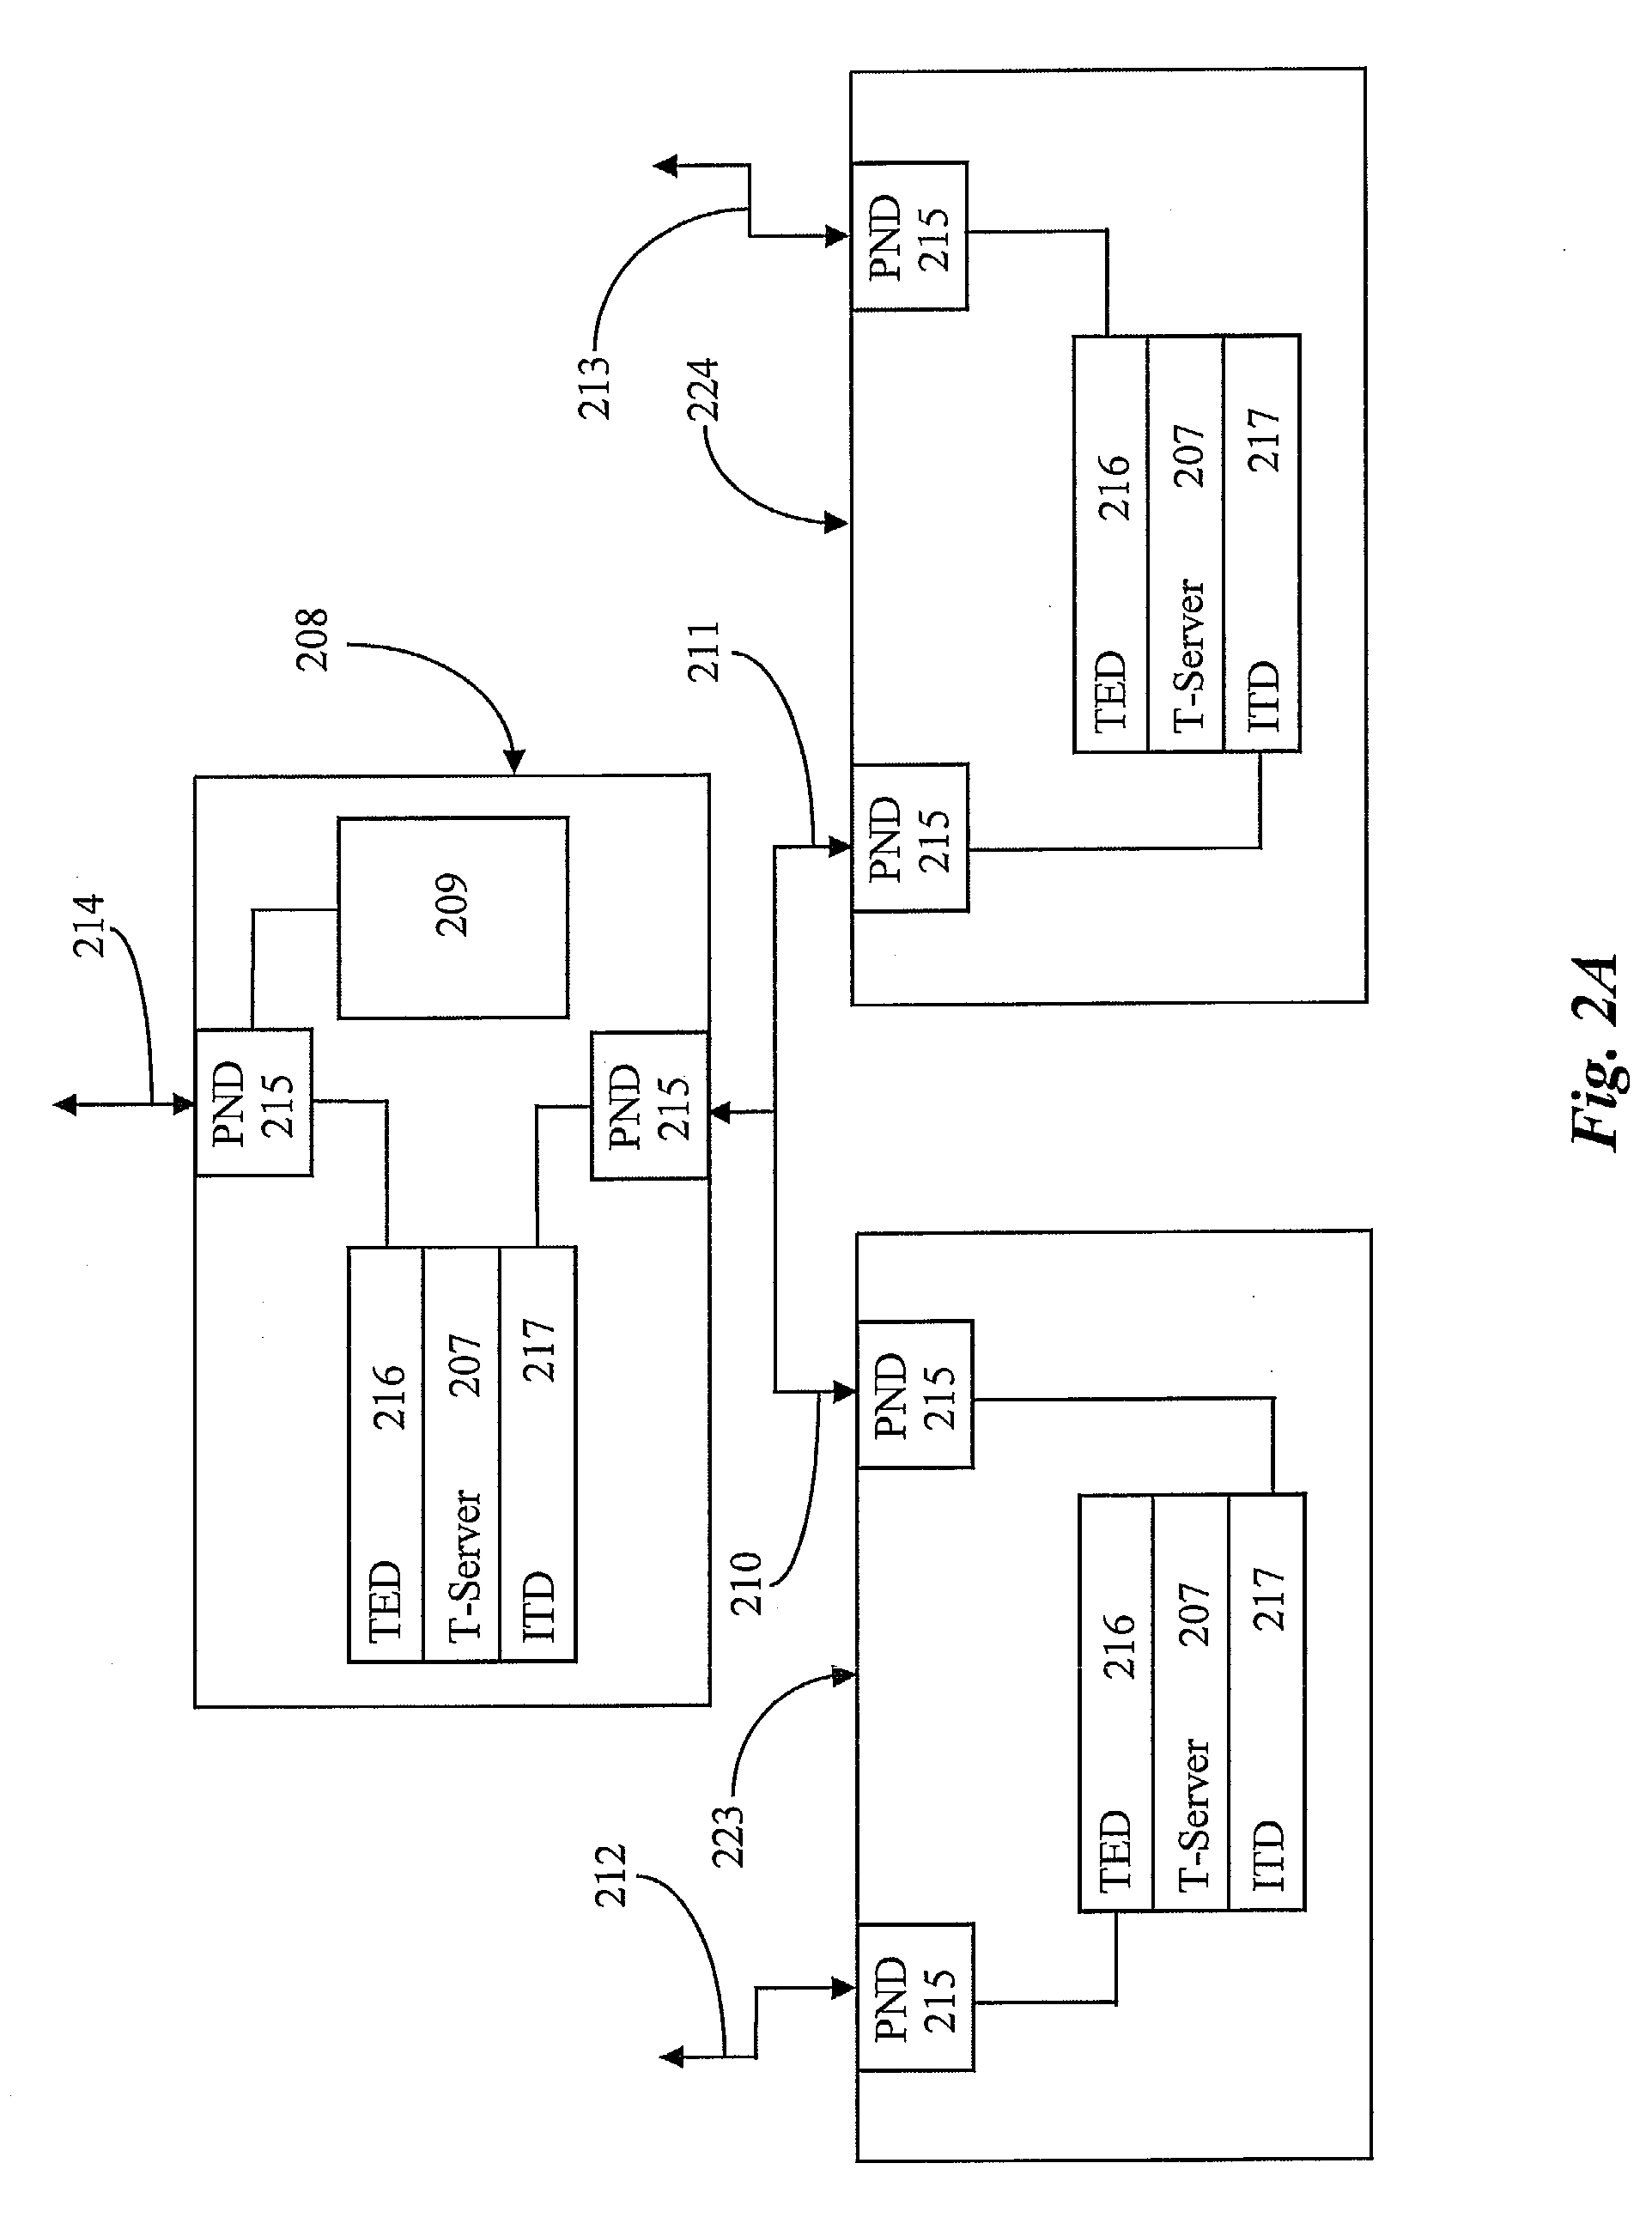 System for Routing Electronic Mails